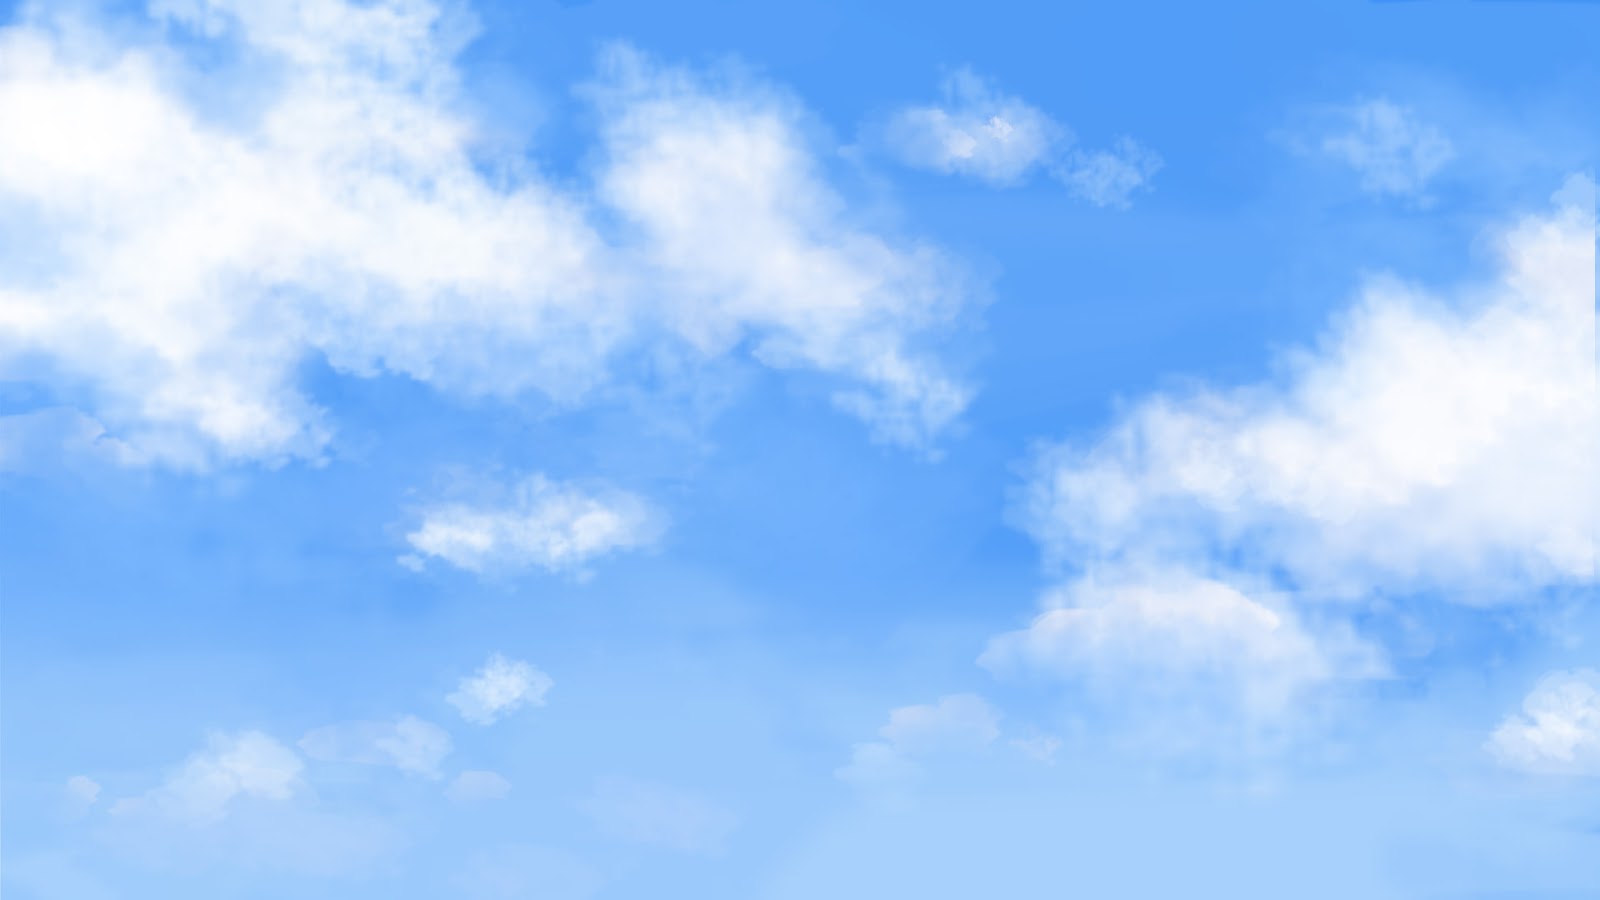 Moving Clouds Background